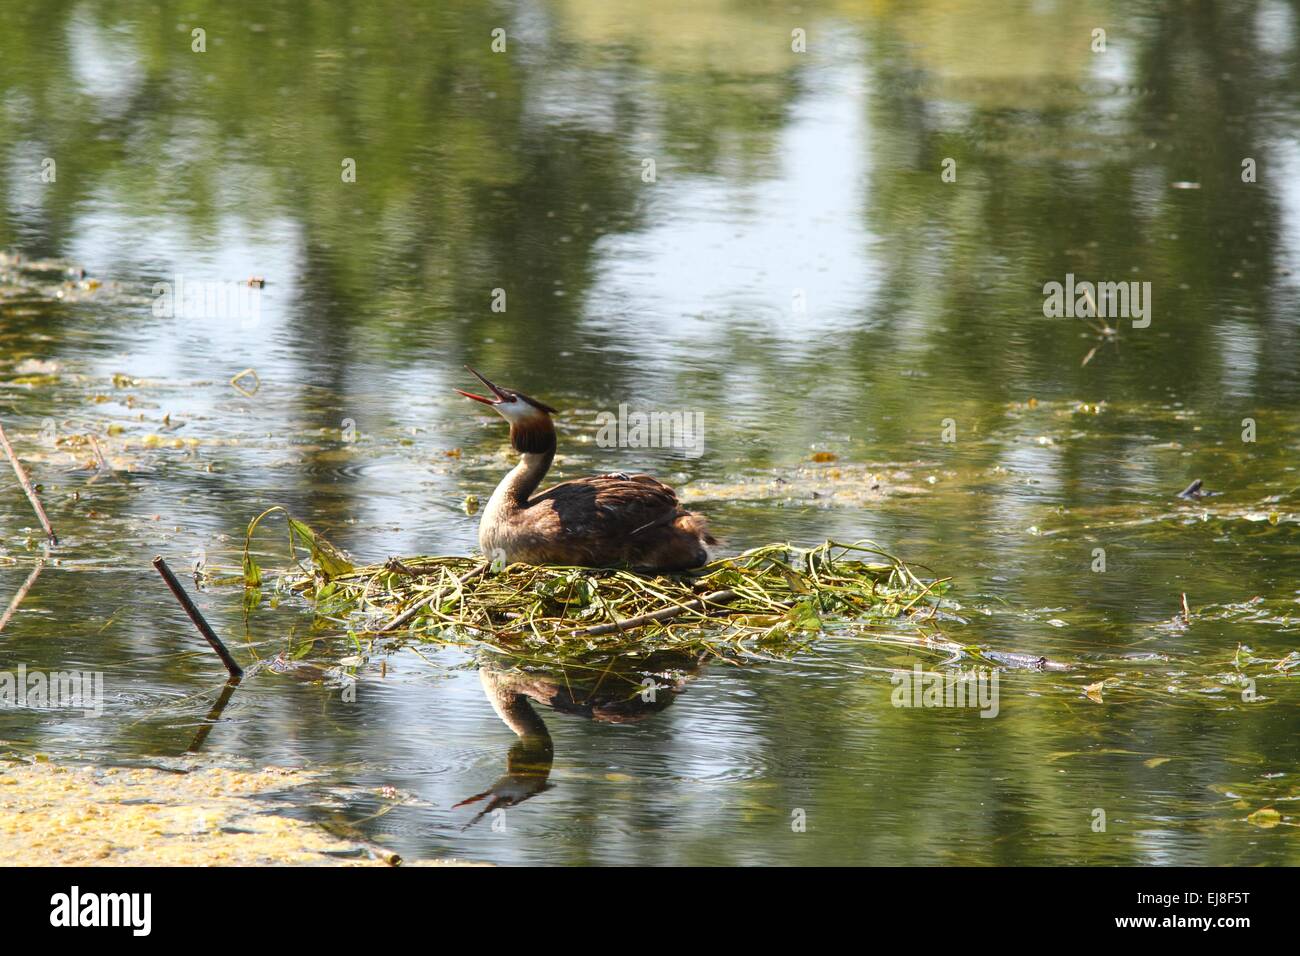 Eared grebe on its nest in the water Stock Photo